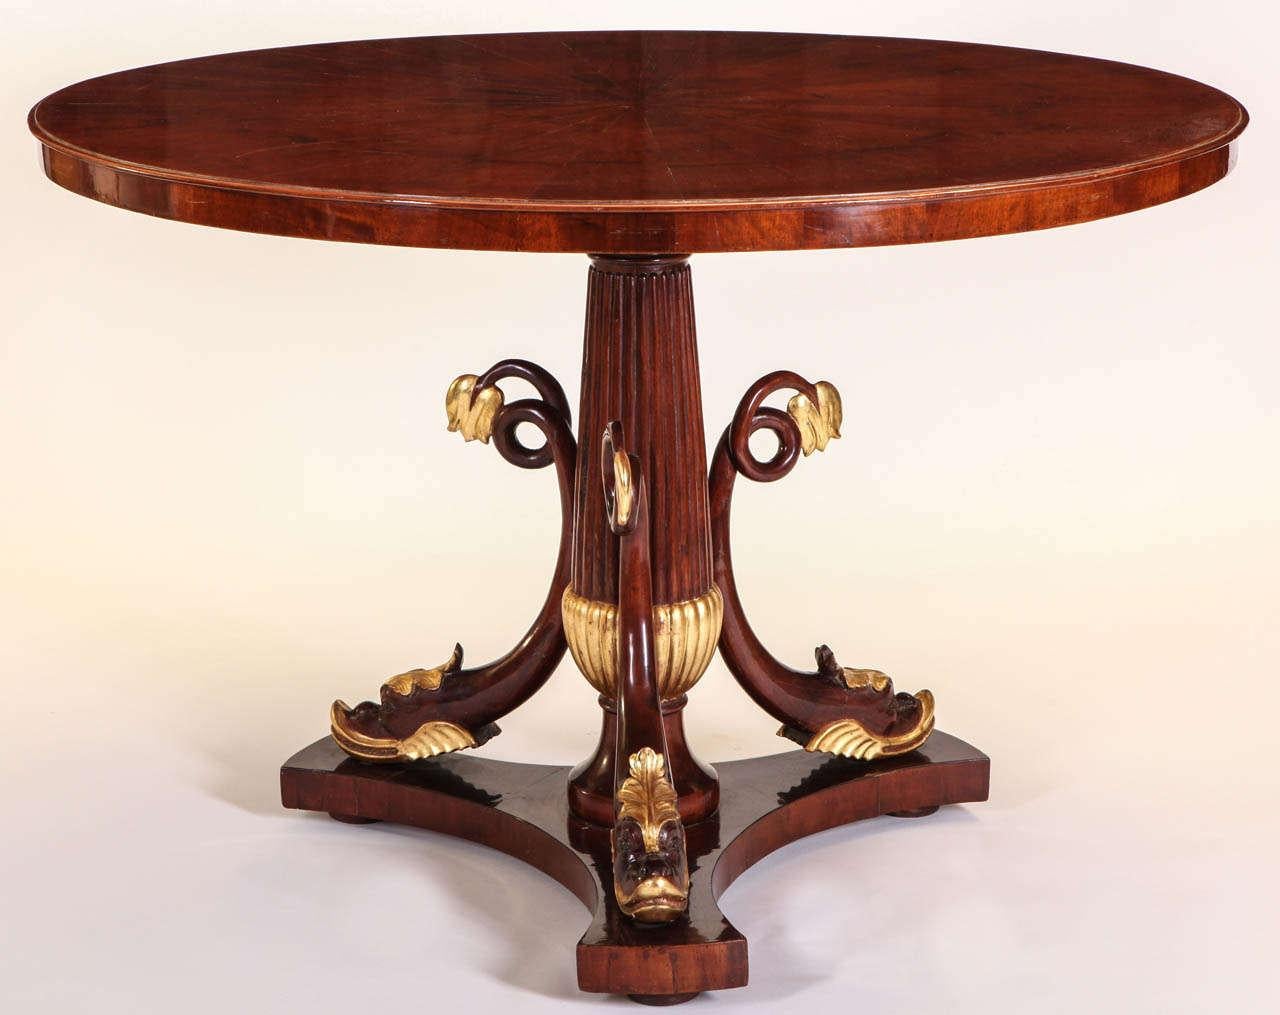 An elegant  Italian mahogany and parcel-gilt center table with a circular top above  a centered balauster support with  a triple addorsed dolphins on a triform base.  
Timeless decoration for your interior. 
Very good condition. Only the wear of the